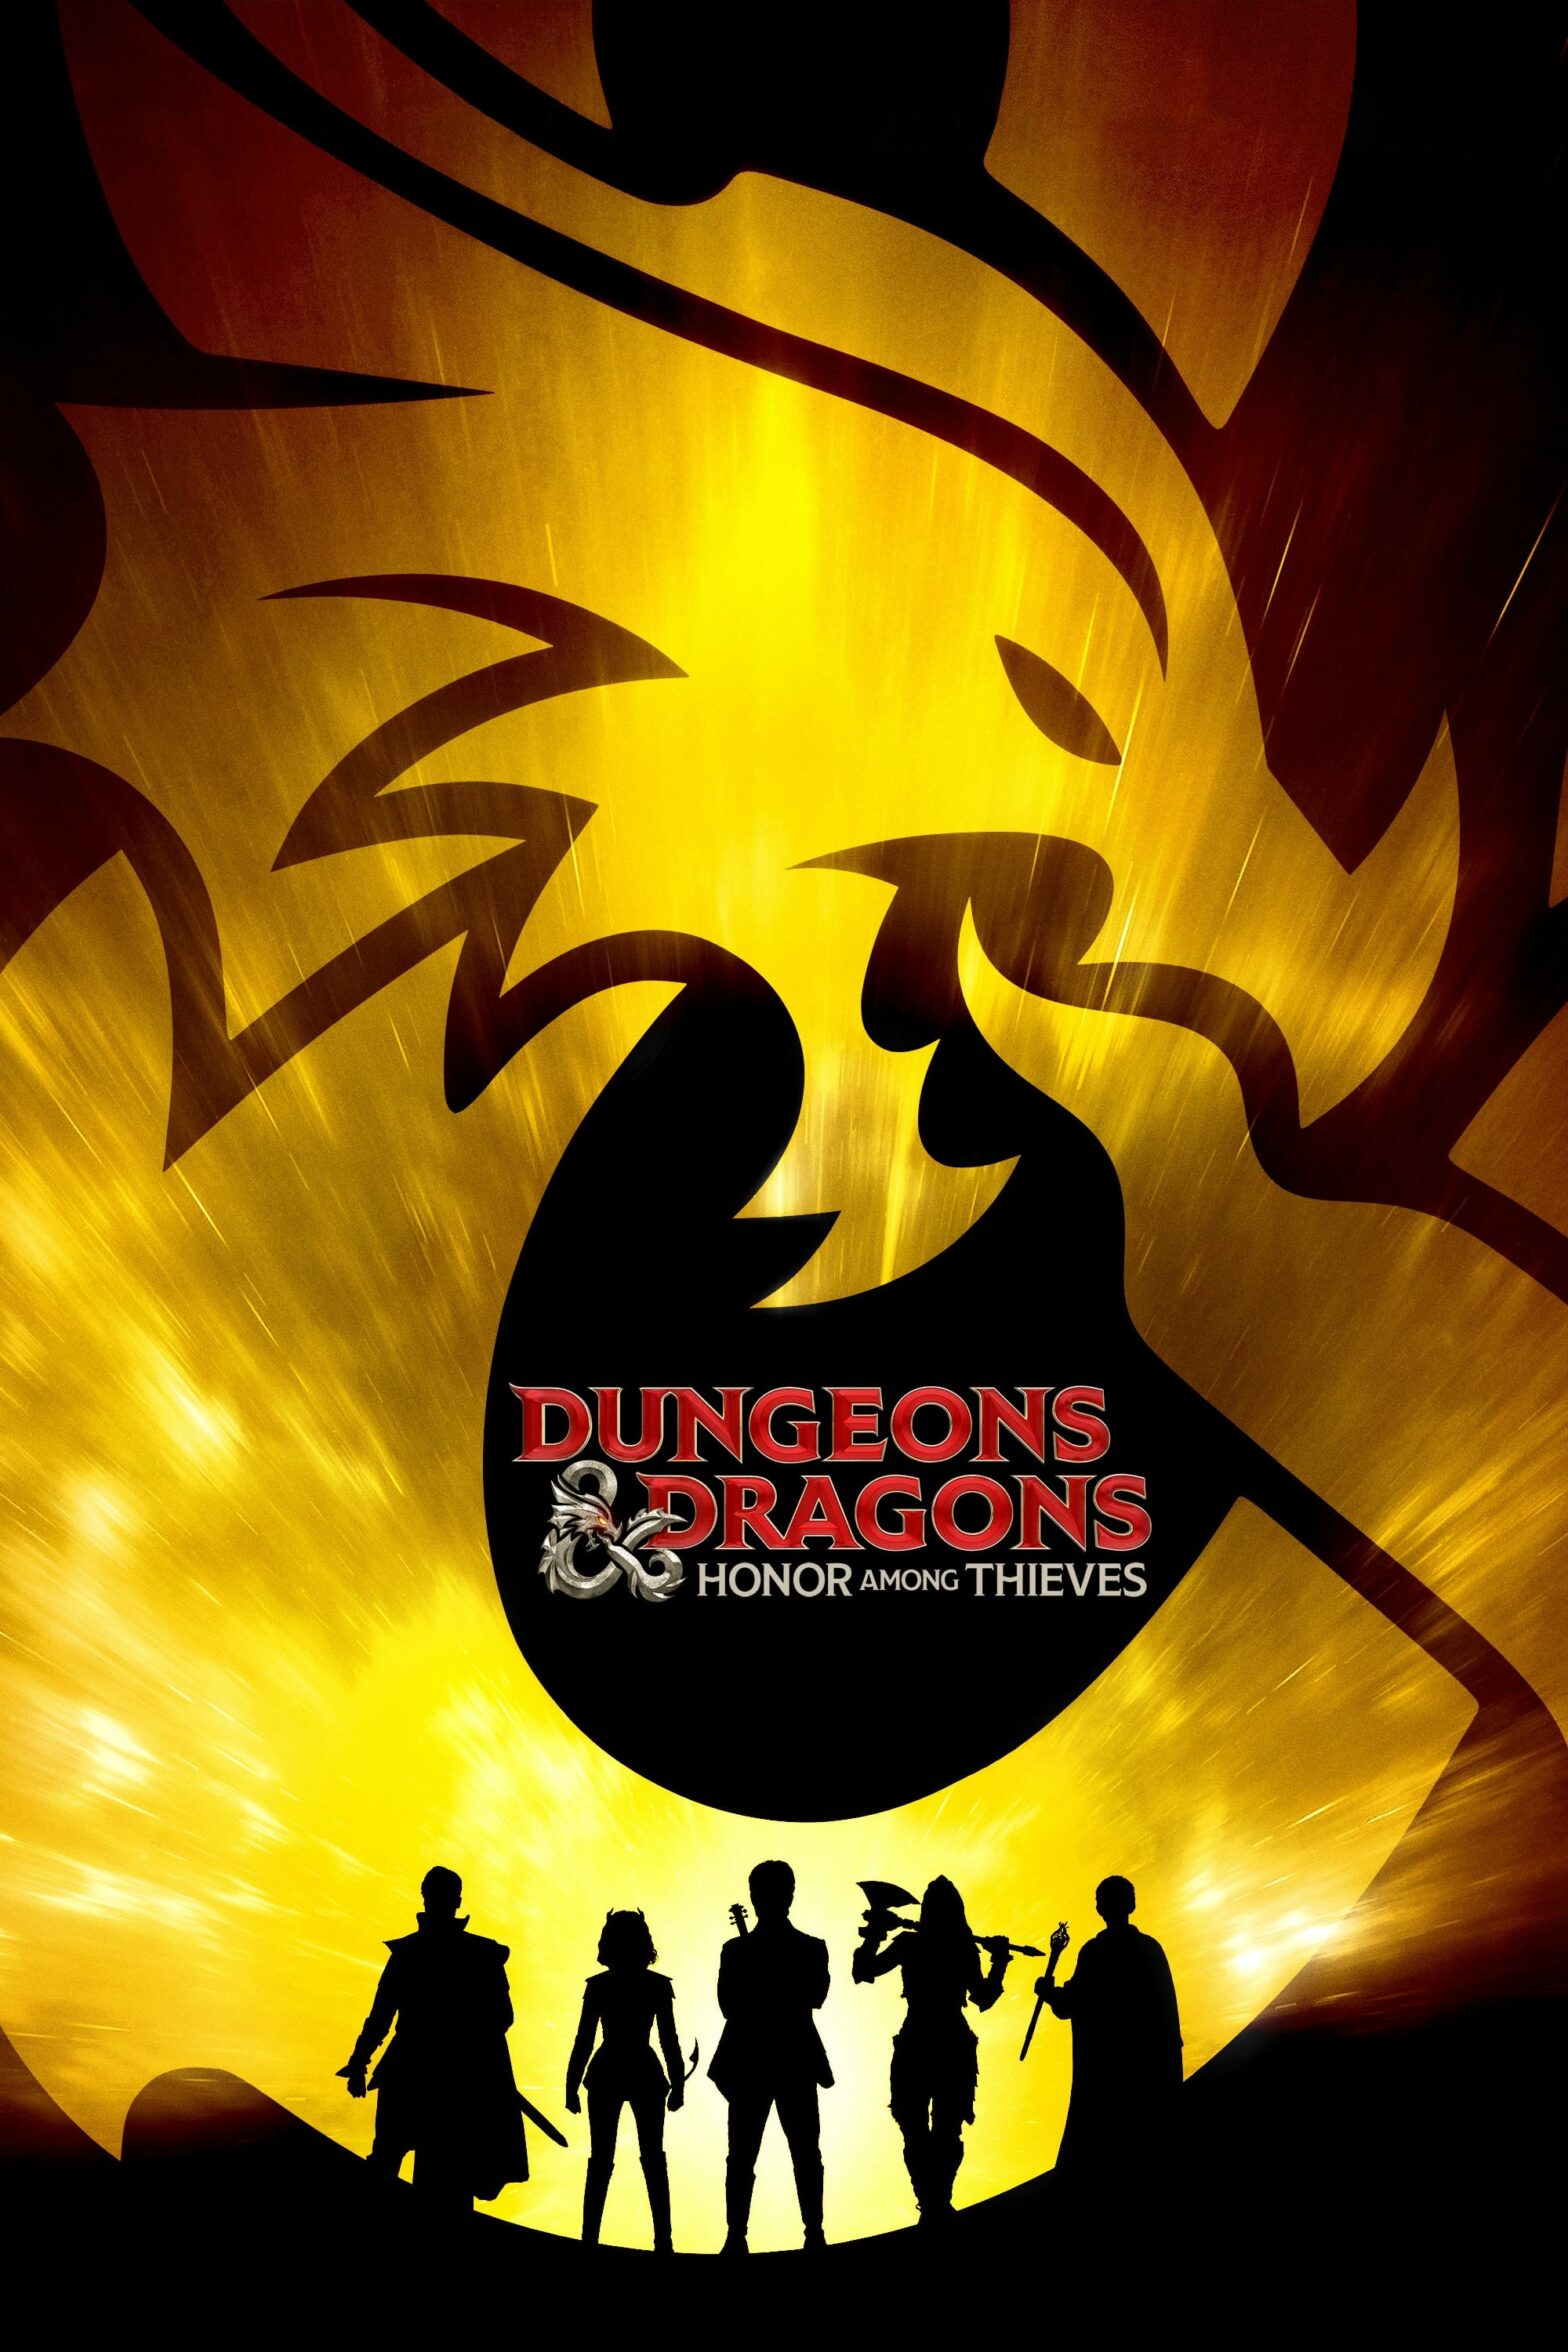 Poster for the movie "Dungeons & Dragons: Honor Among Thieves"